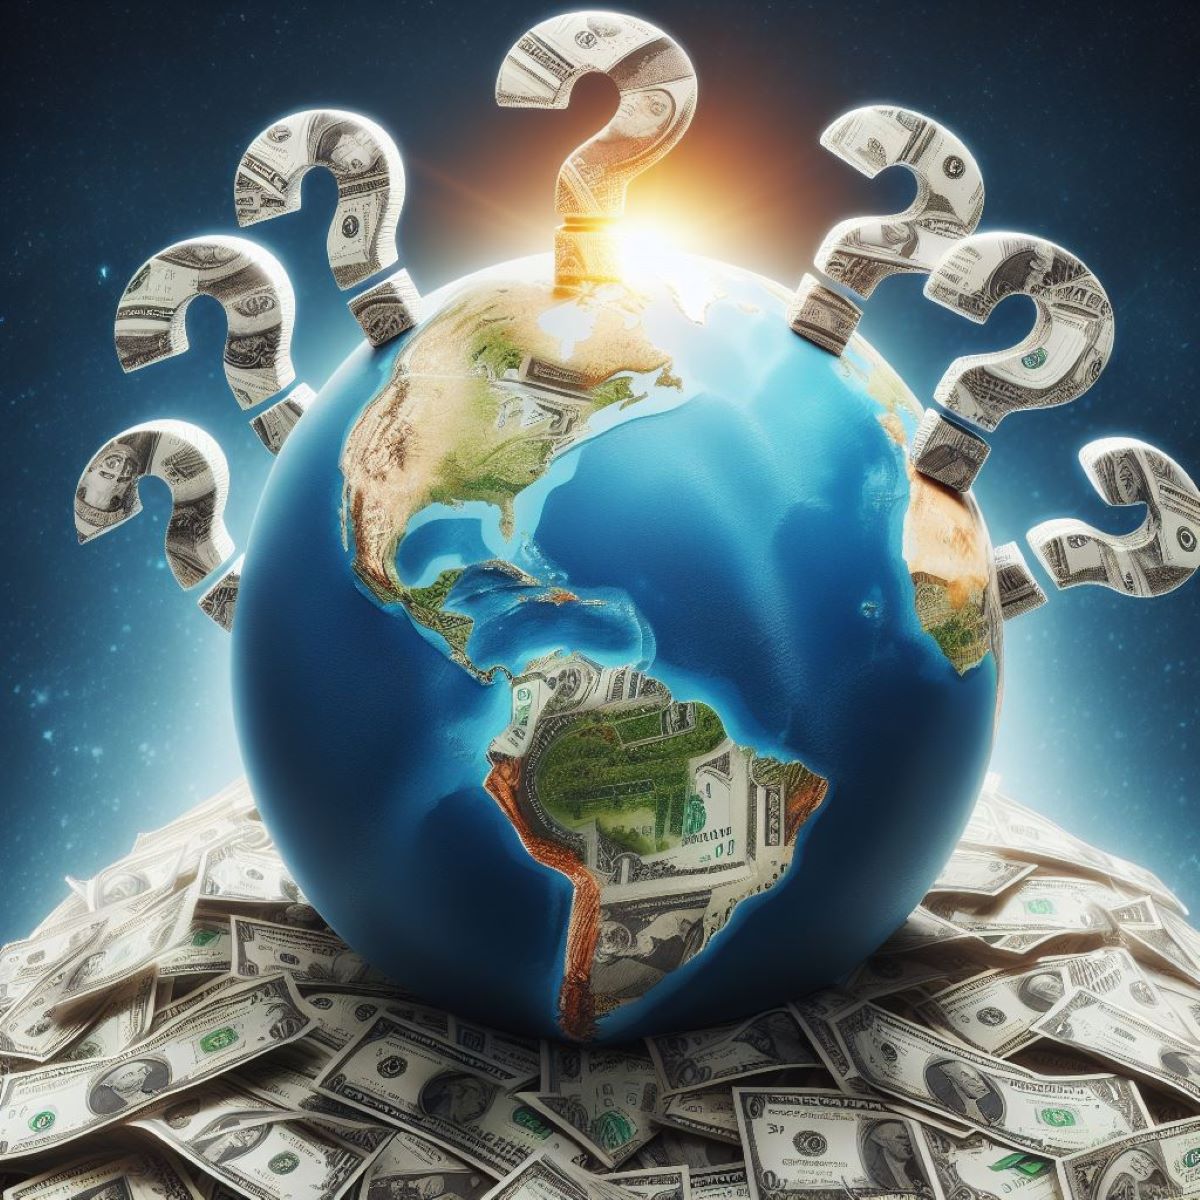 unclaimed money shown on a globe